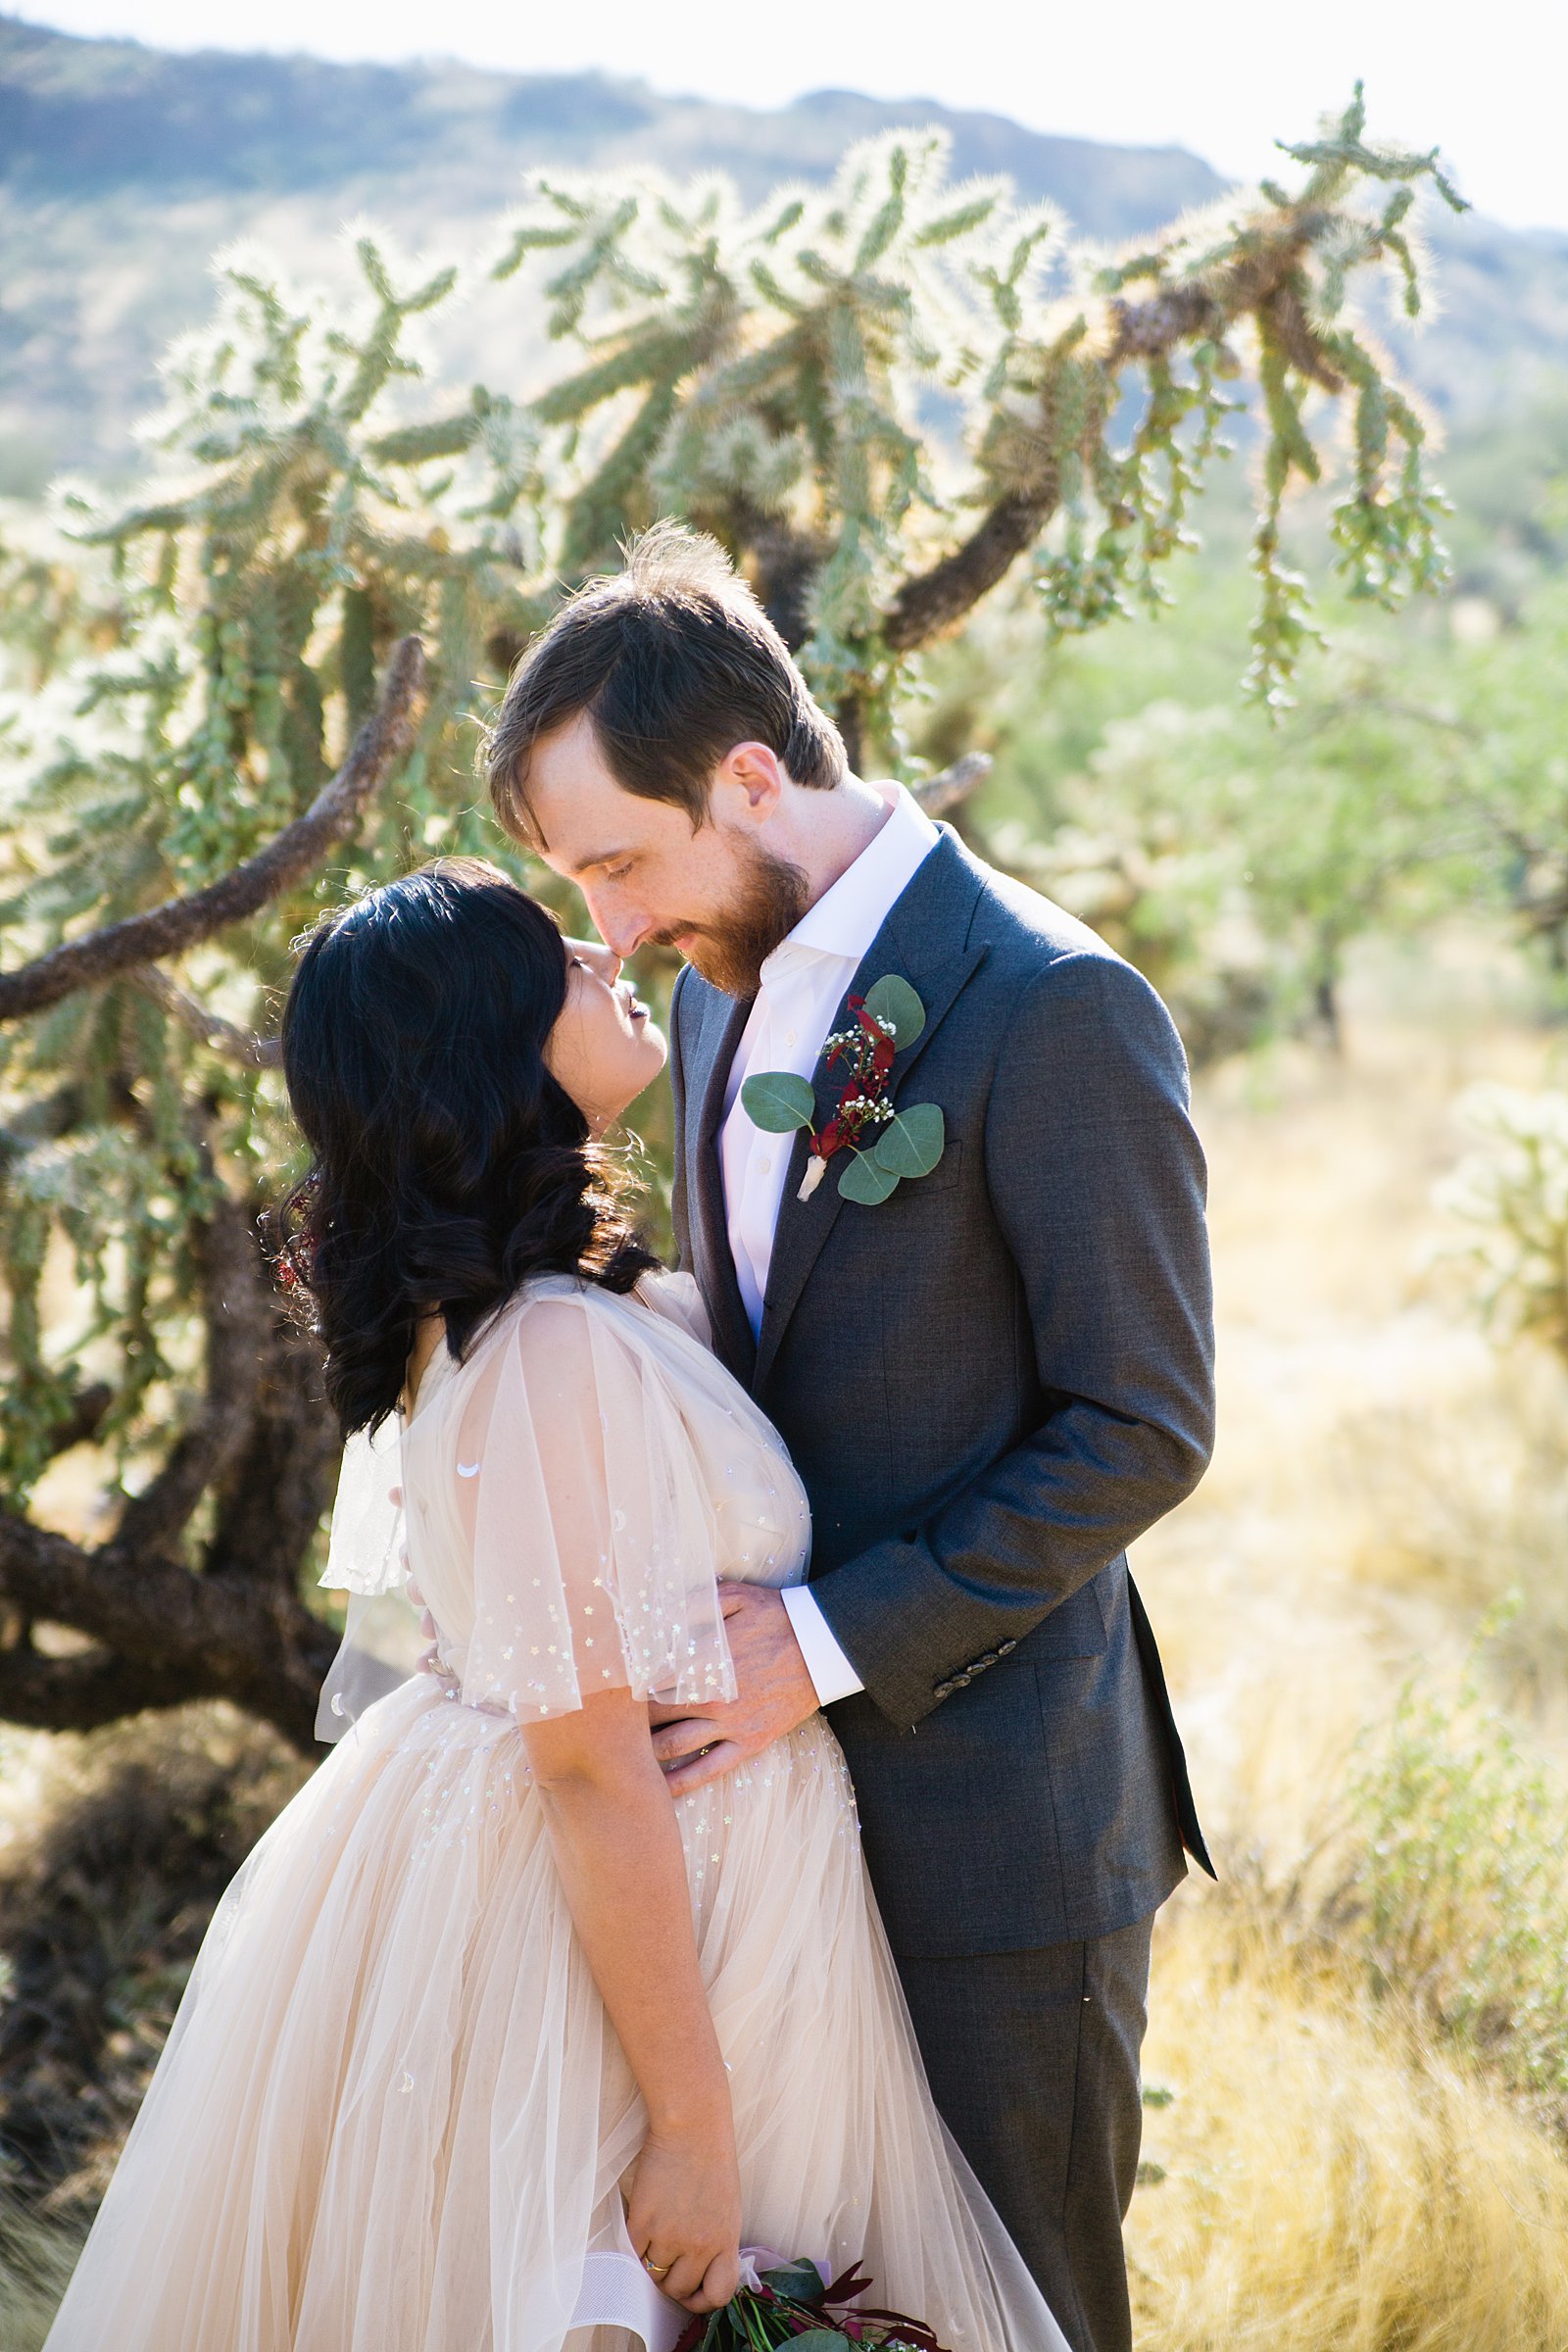 Bride and Groom share an intimate moment at their Cloth and Flame Superstition Mountain wedding by Arizona wedding photographer PMA Photography.